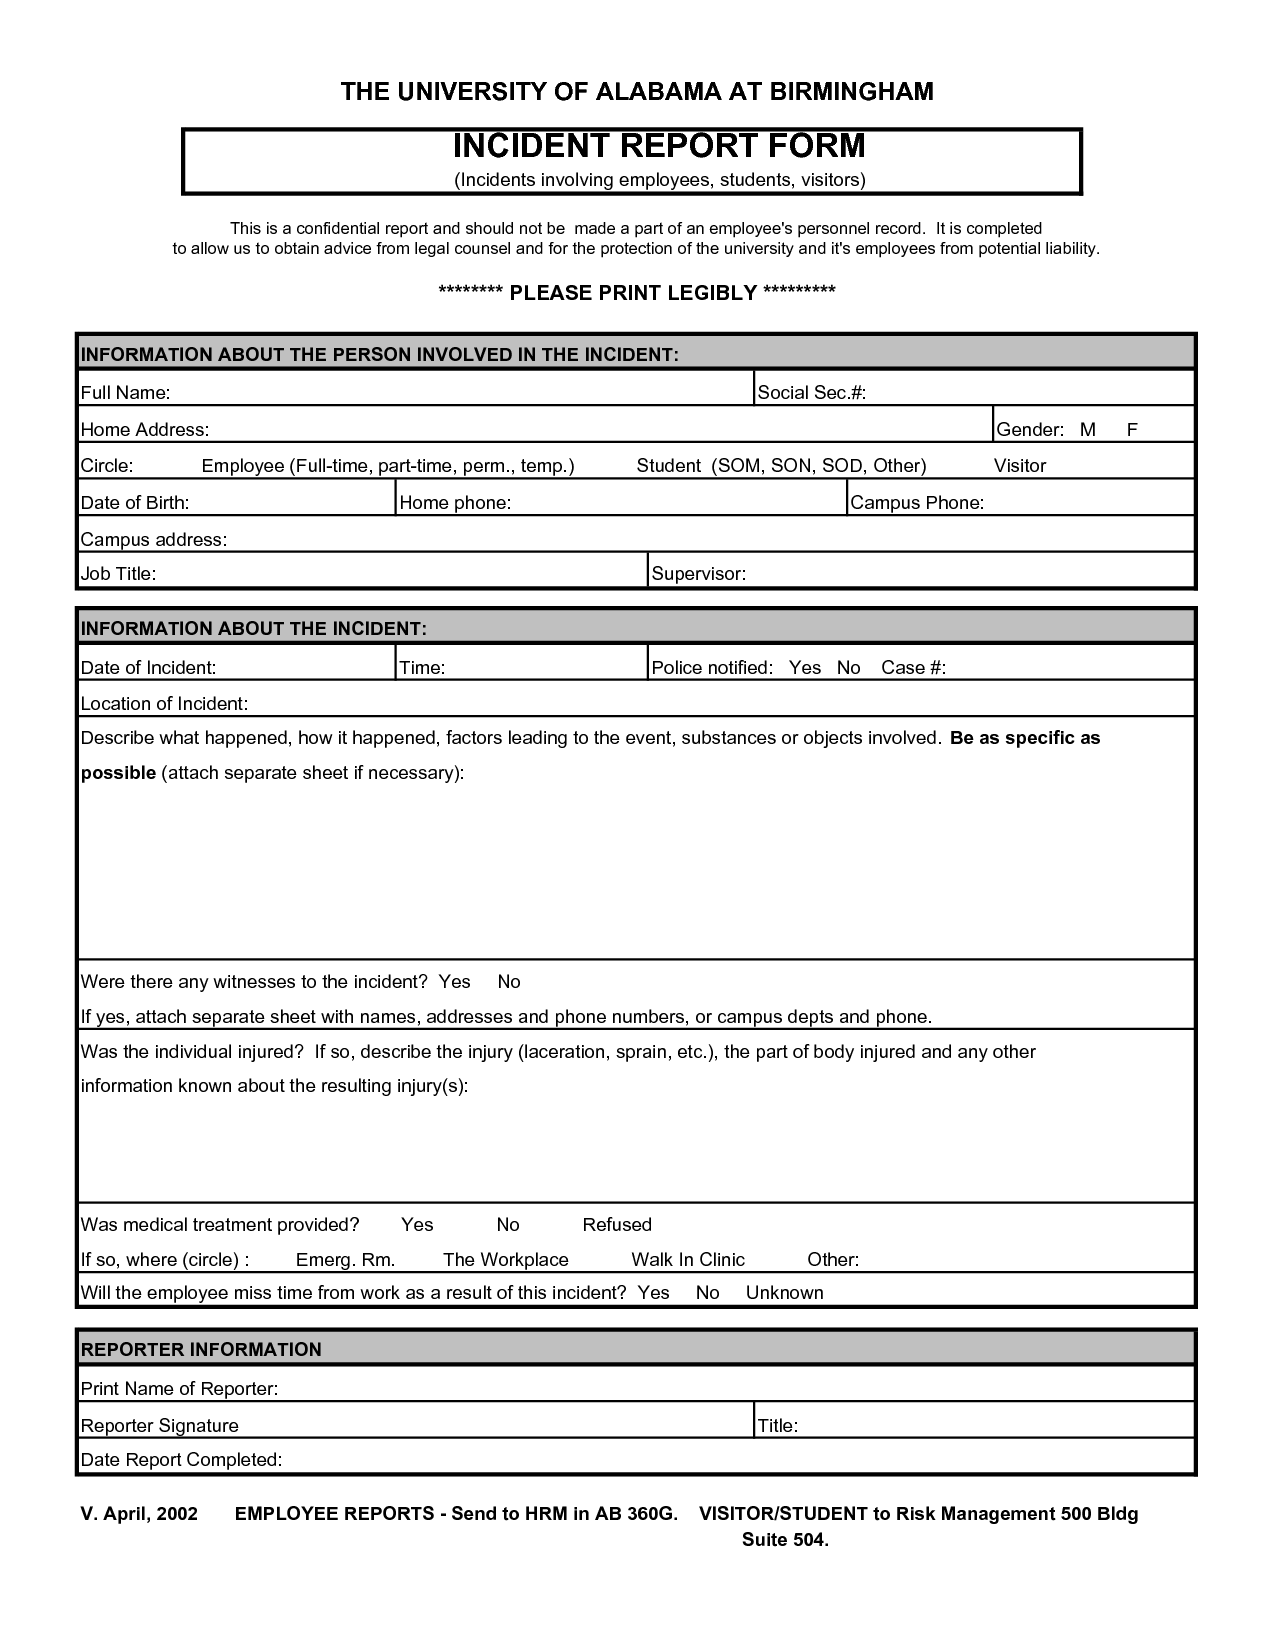 Pictures: Incident Report Form Pdf, Coloring Page for Kids